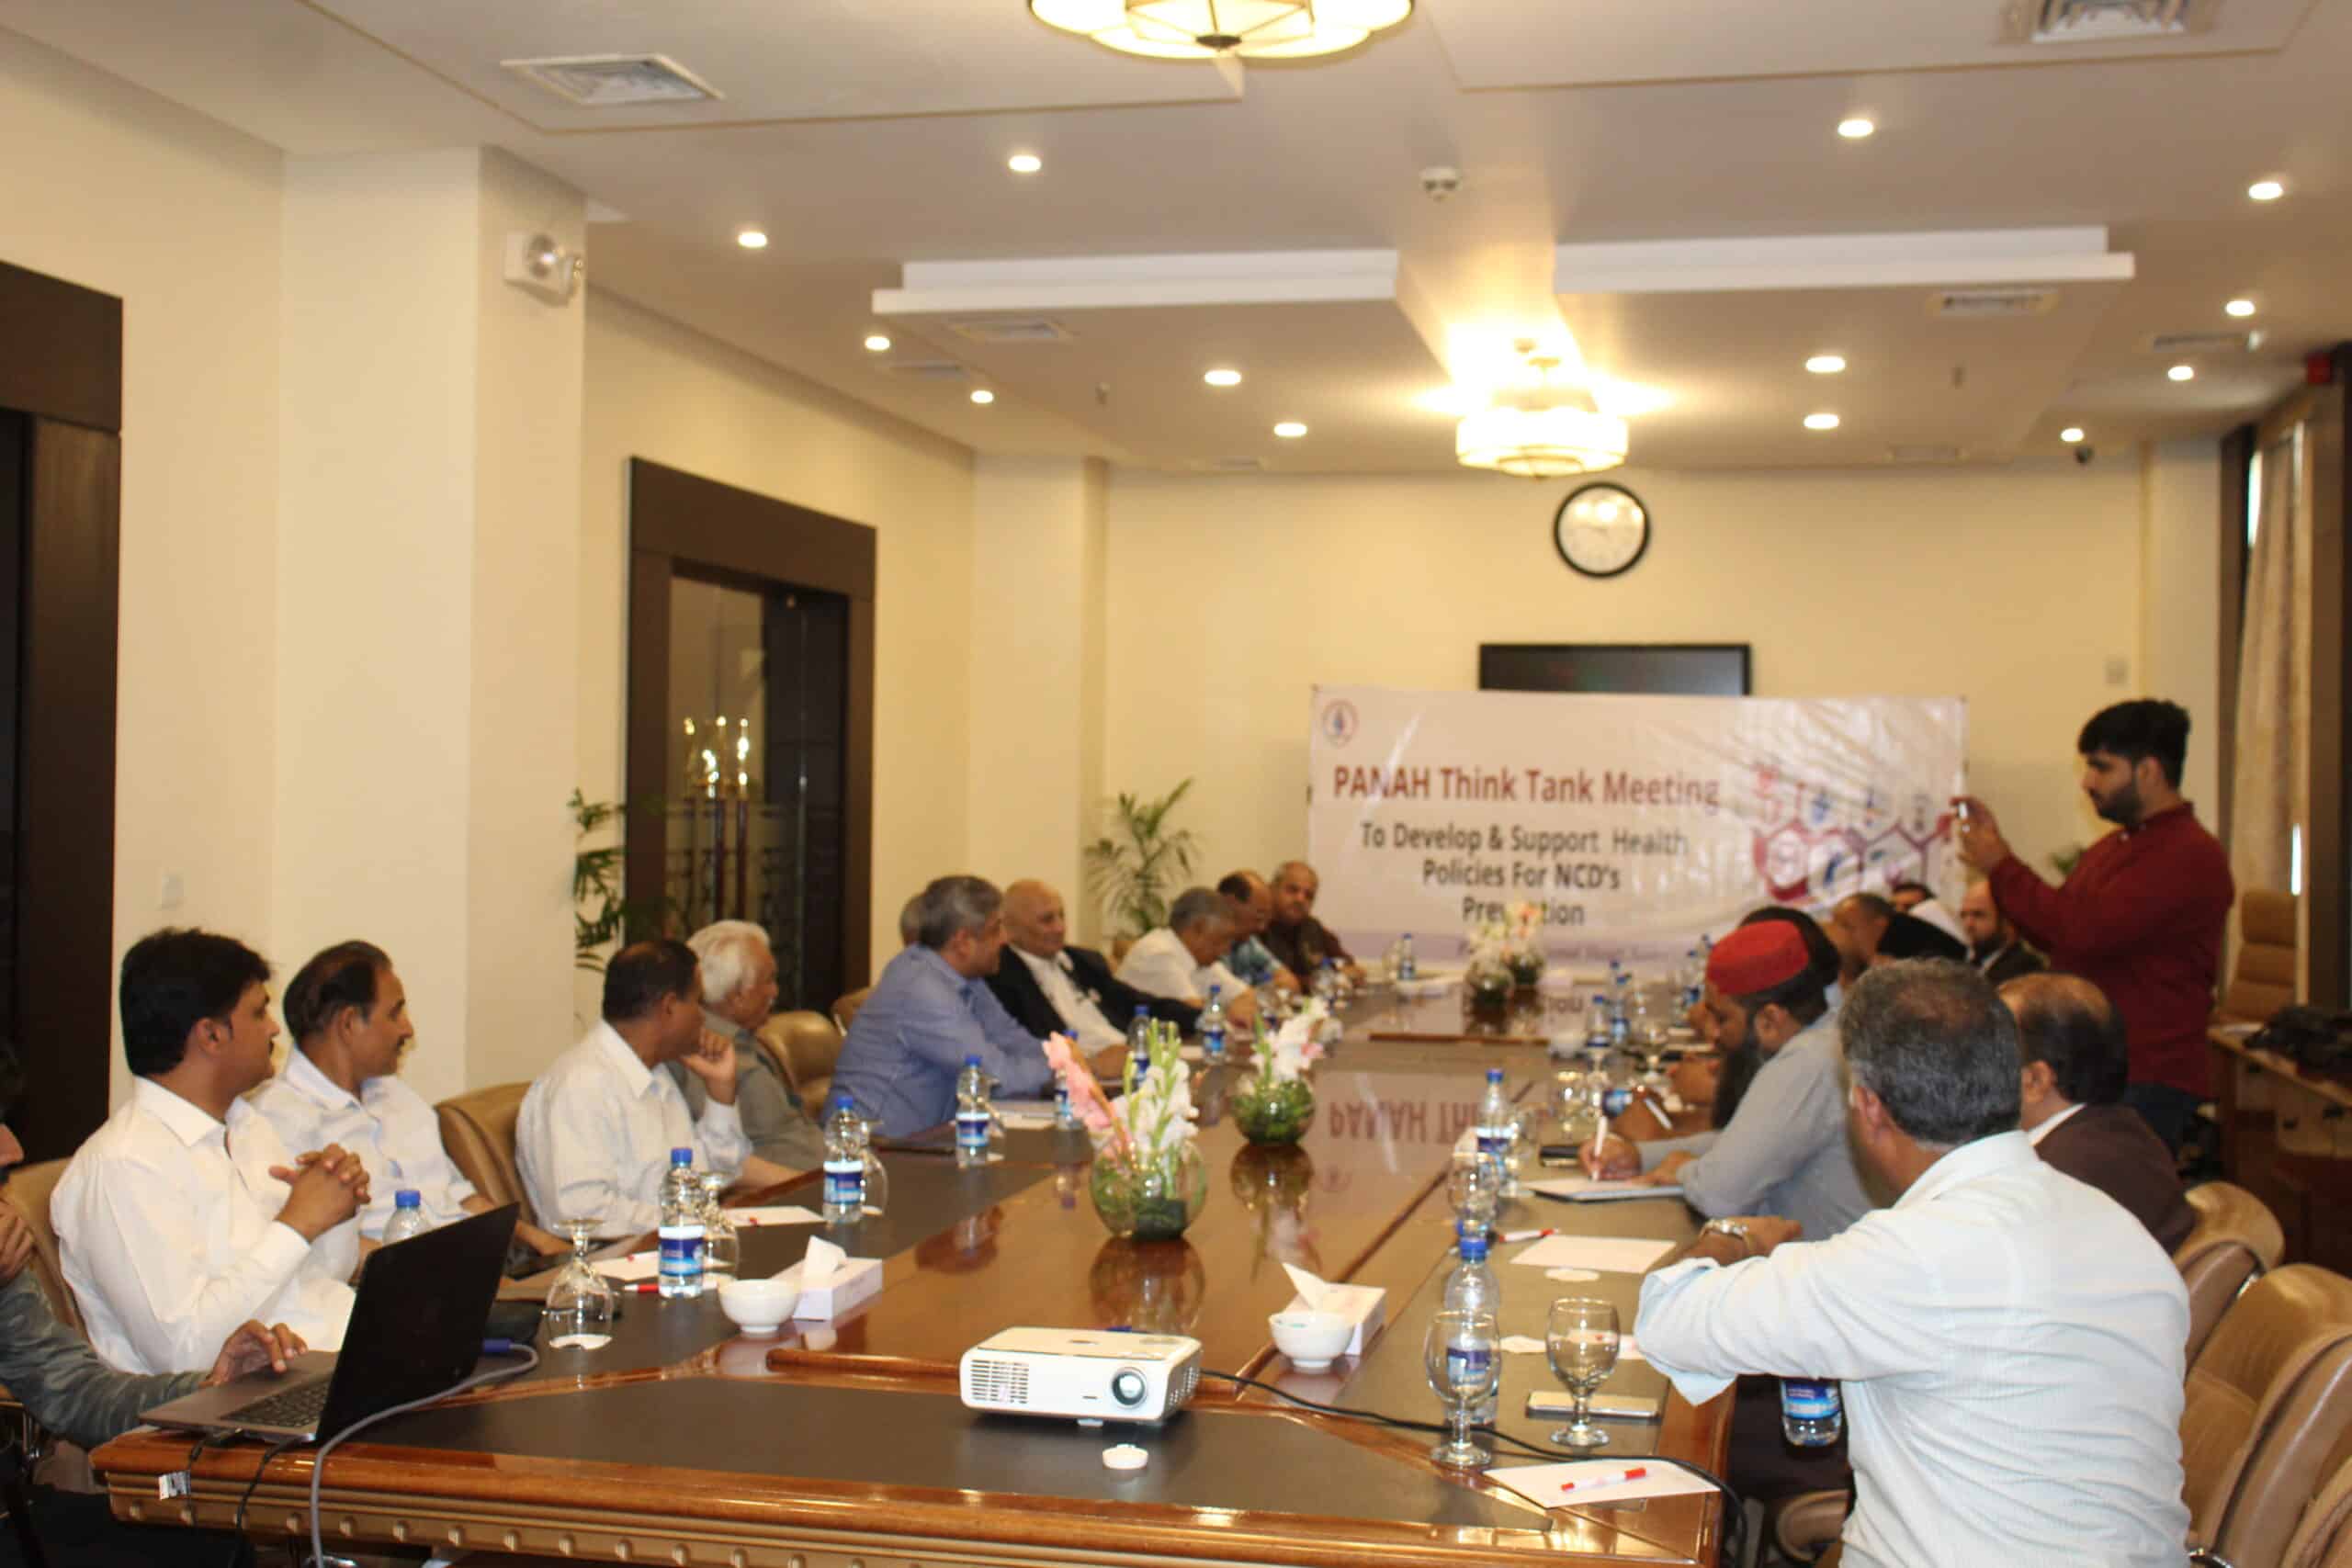 PANAH Think Tank Meeting To Develop & Support Health Policies For NCD’s Prevention . 20th June Ramada Hotel Islamabad